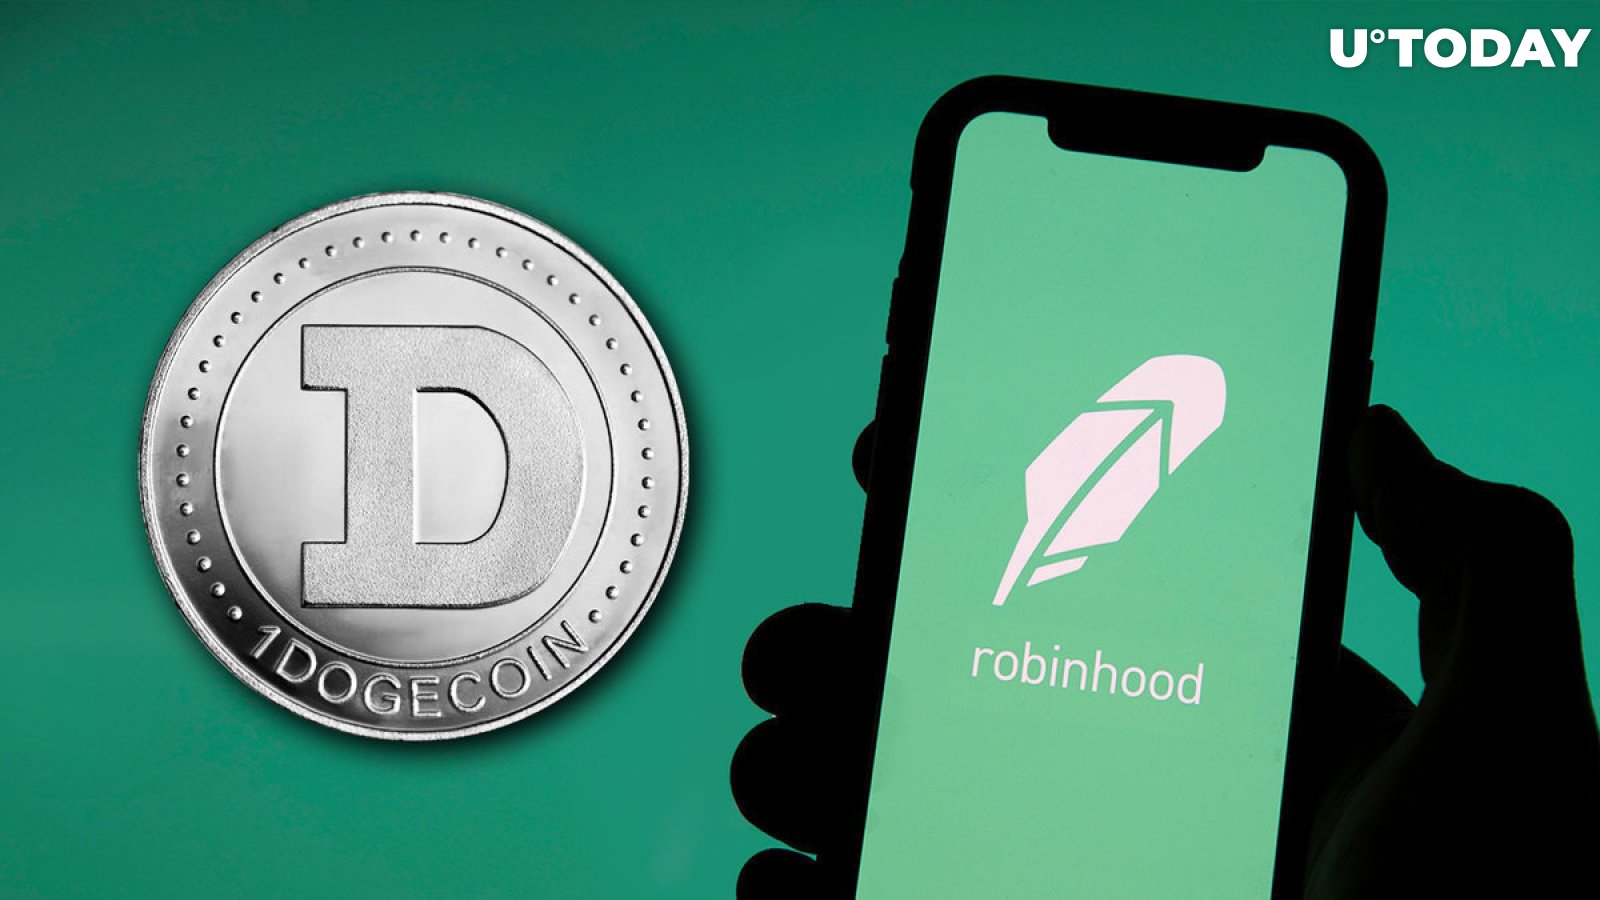 400 Million DOGE Sent to Robinhood as Dogecoin Reclaims Spot in Top 10